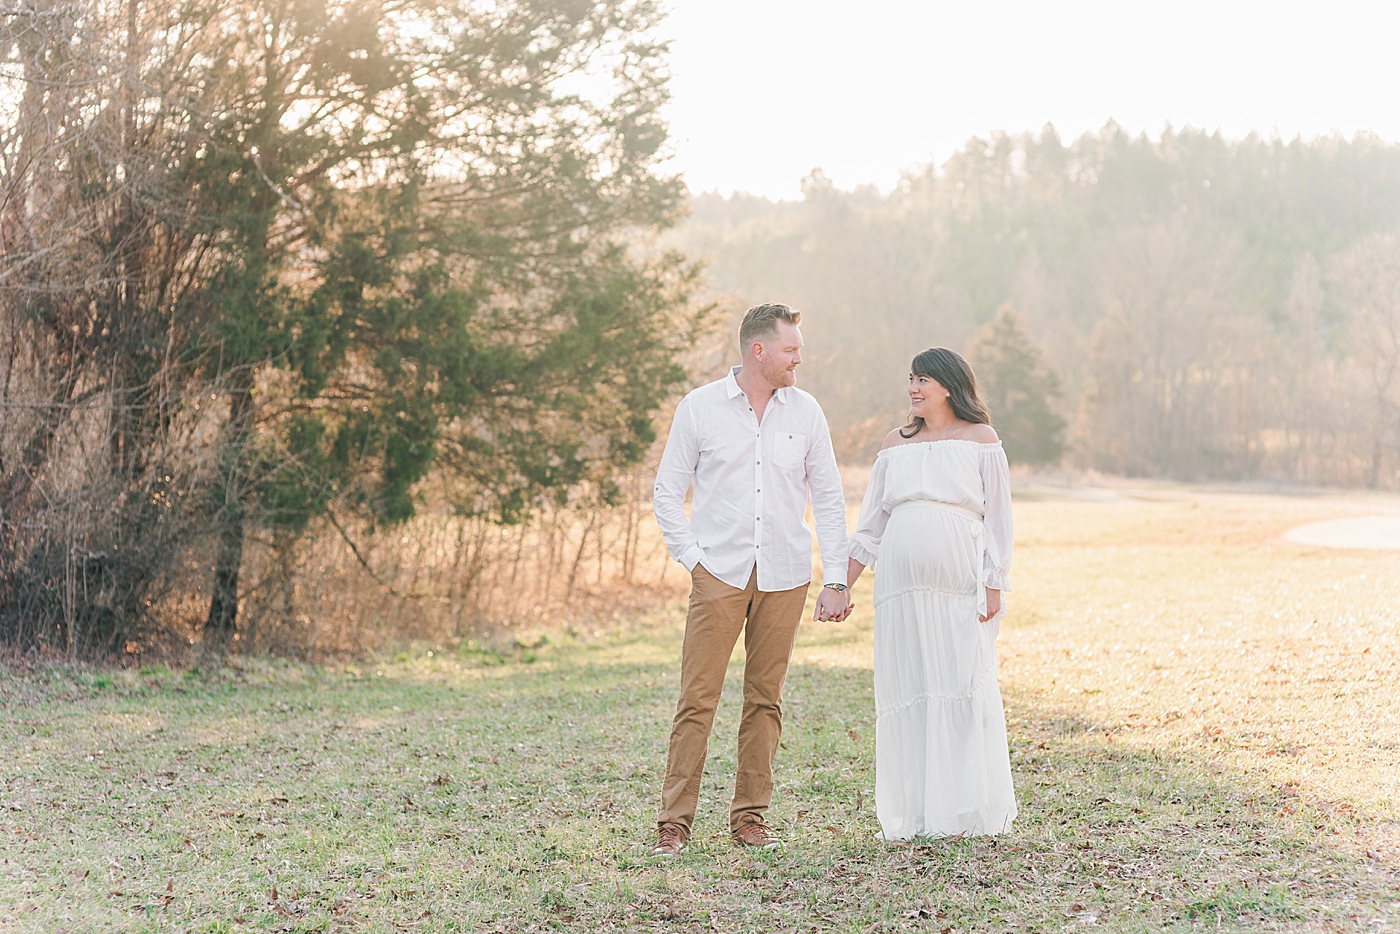 Mother and father to be holding hands in a field | Photo by Anna Wisjo Photography